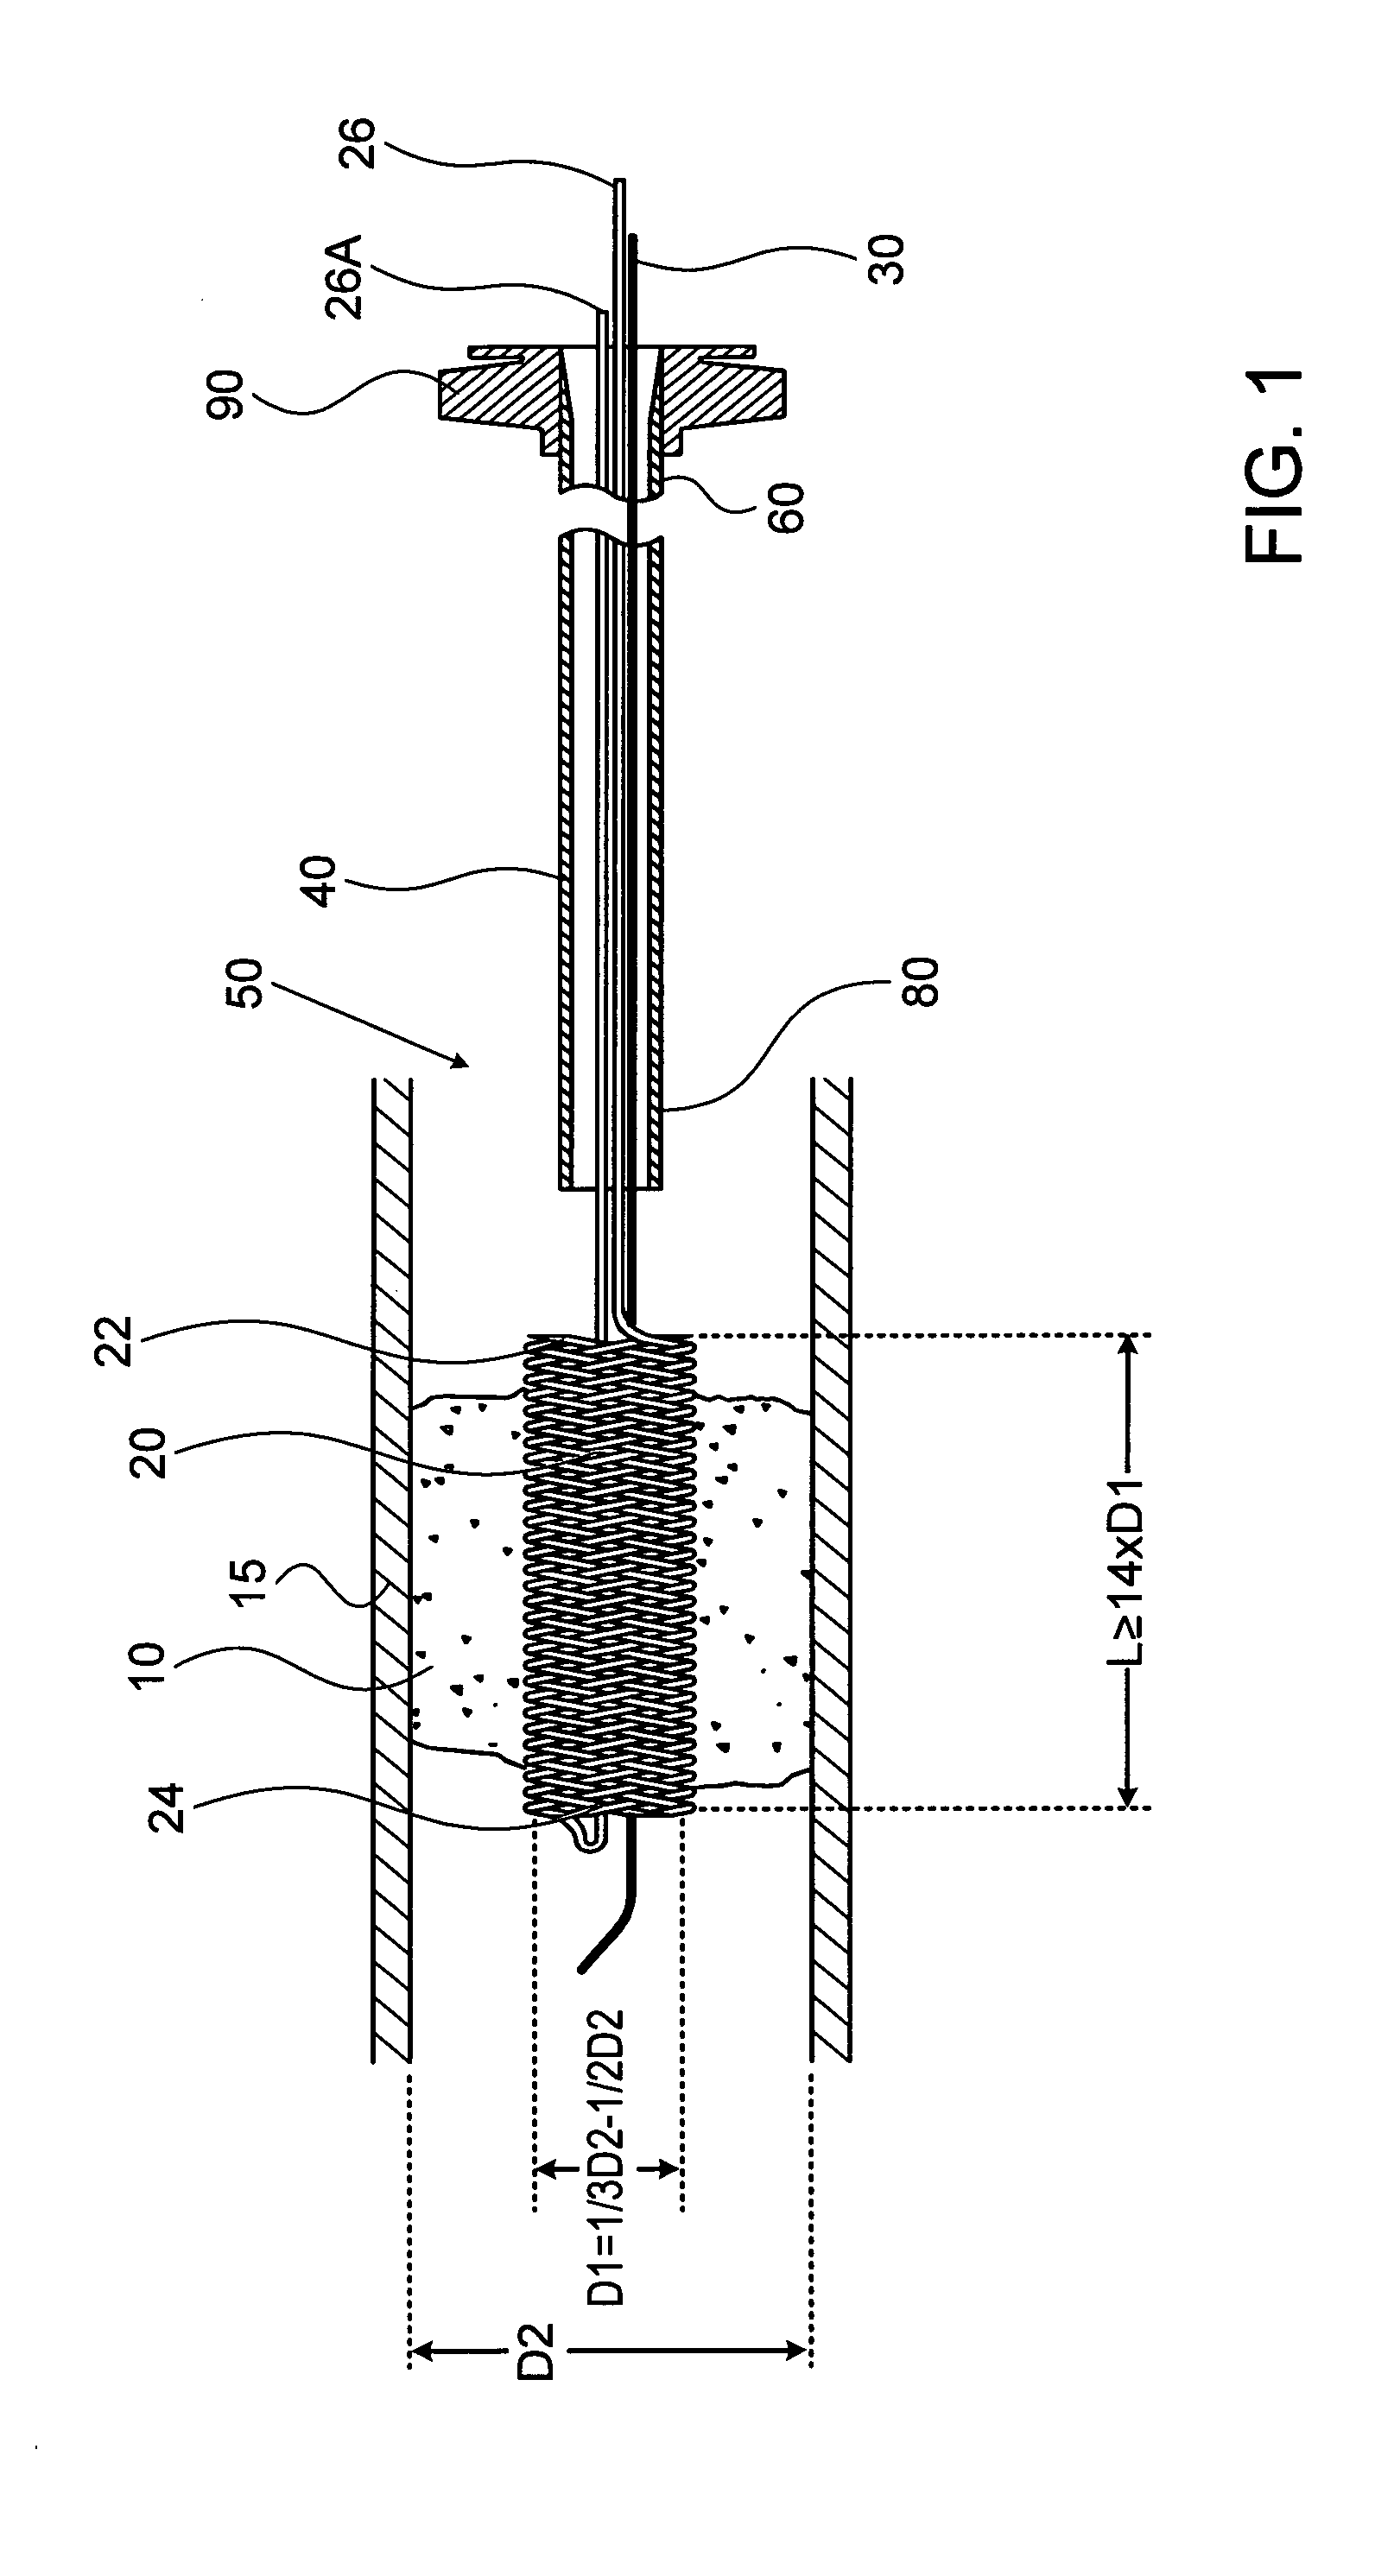 Method and apparatus for allowing blood flow through an occluded vessel